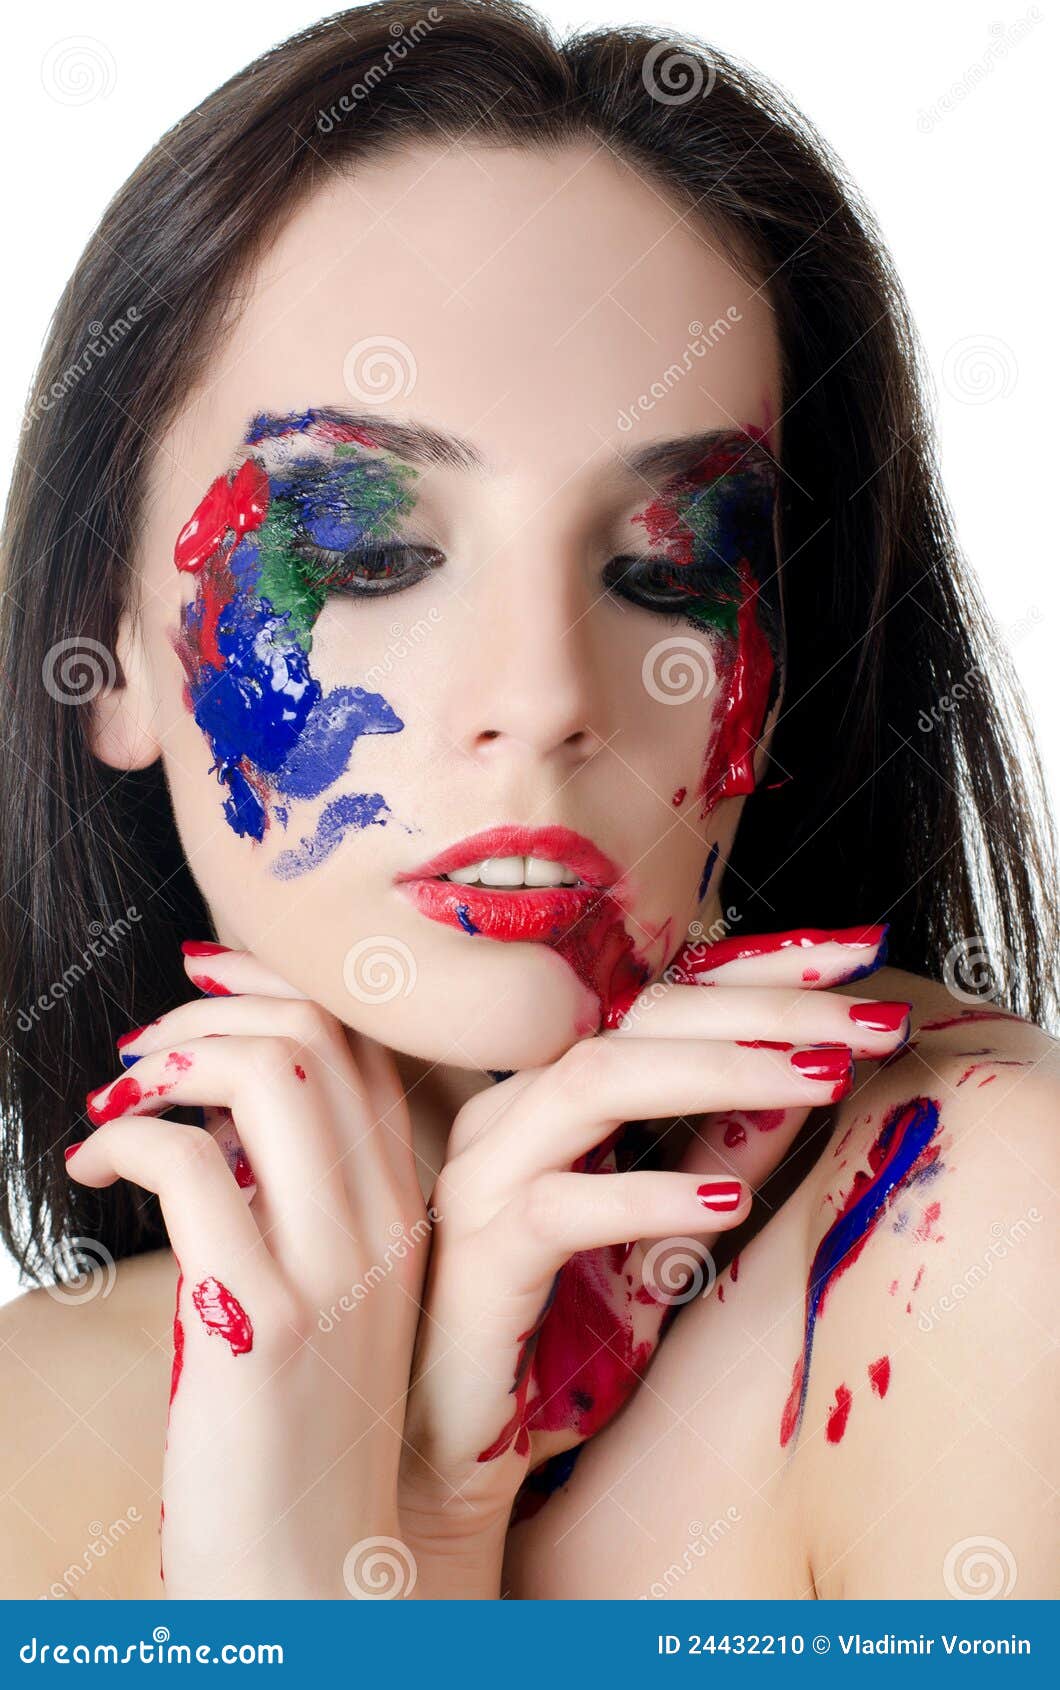 The Beautiful Woman With A Paint On The Face Stock Photo 